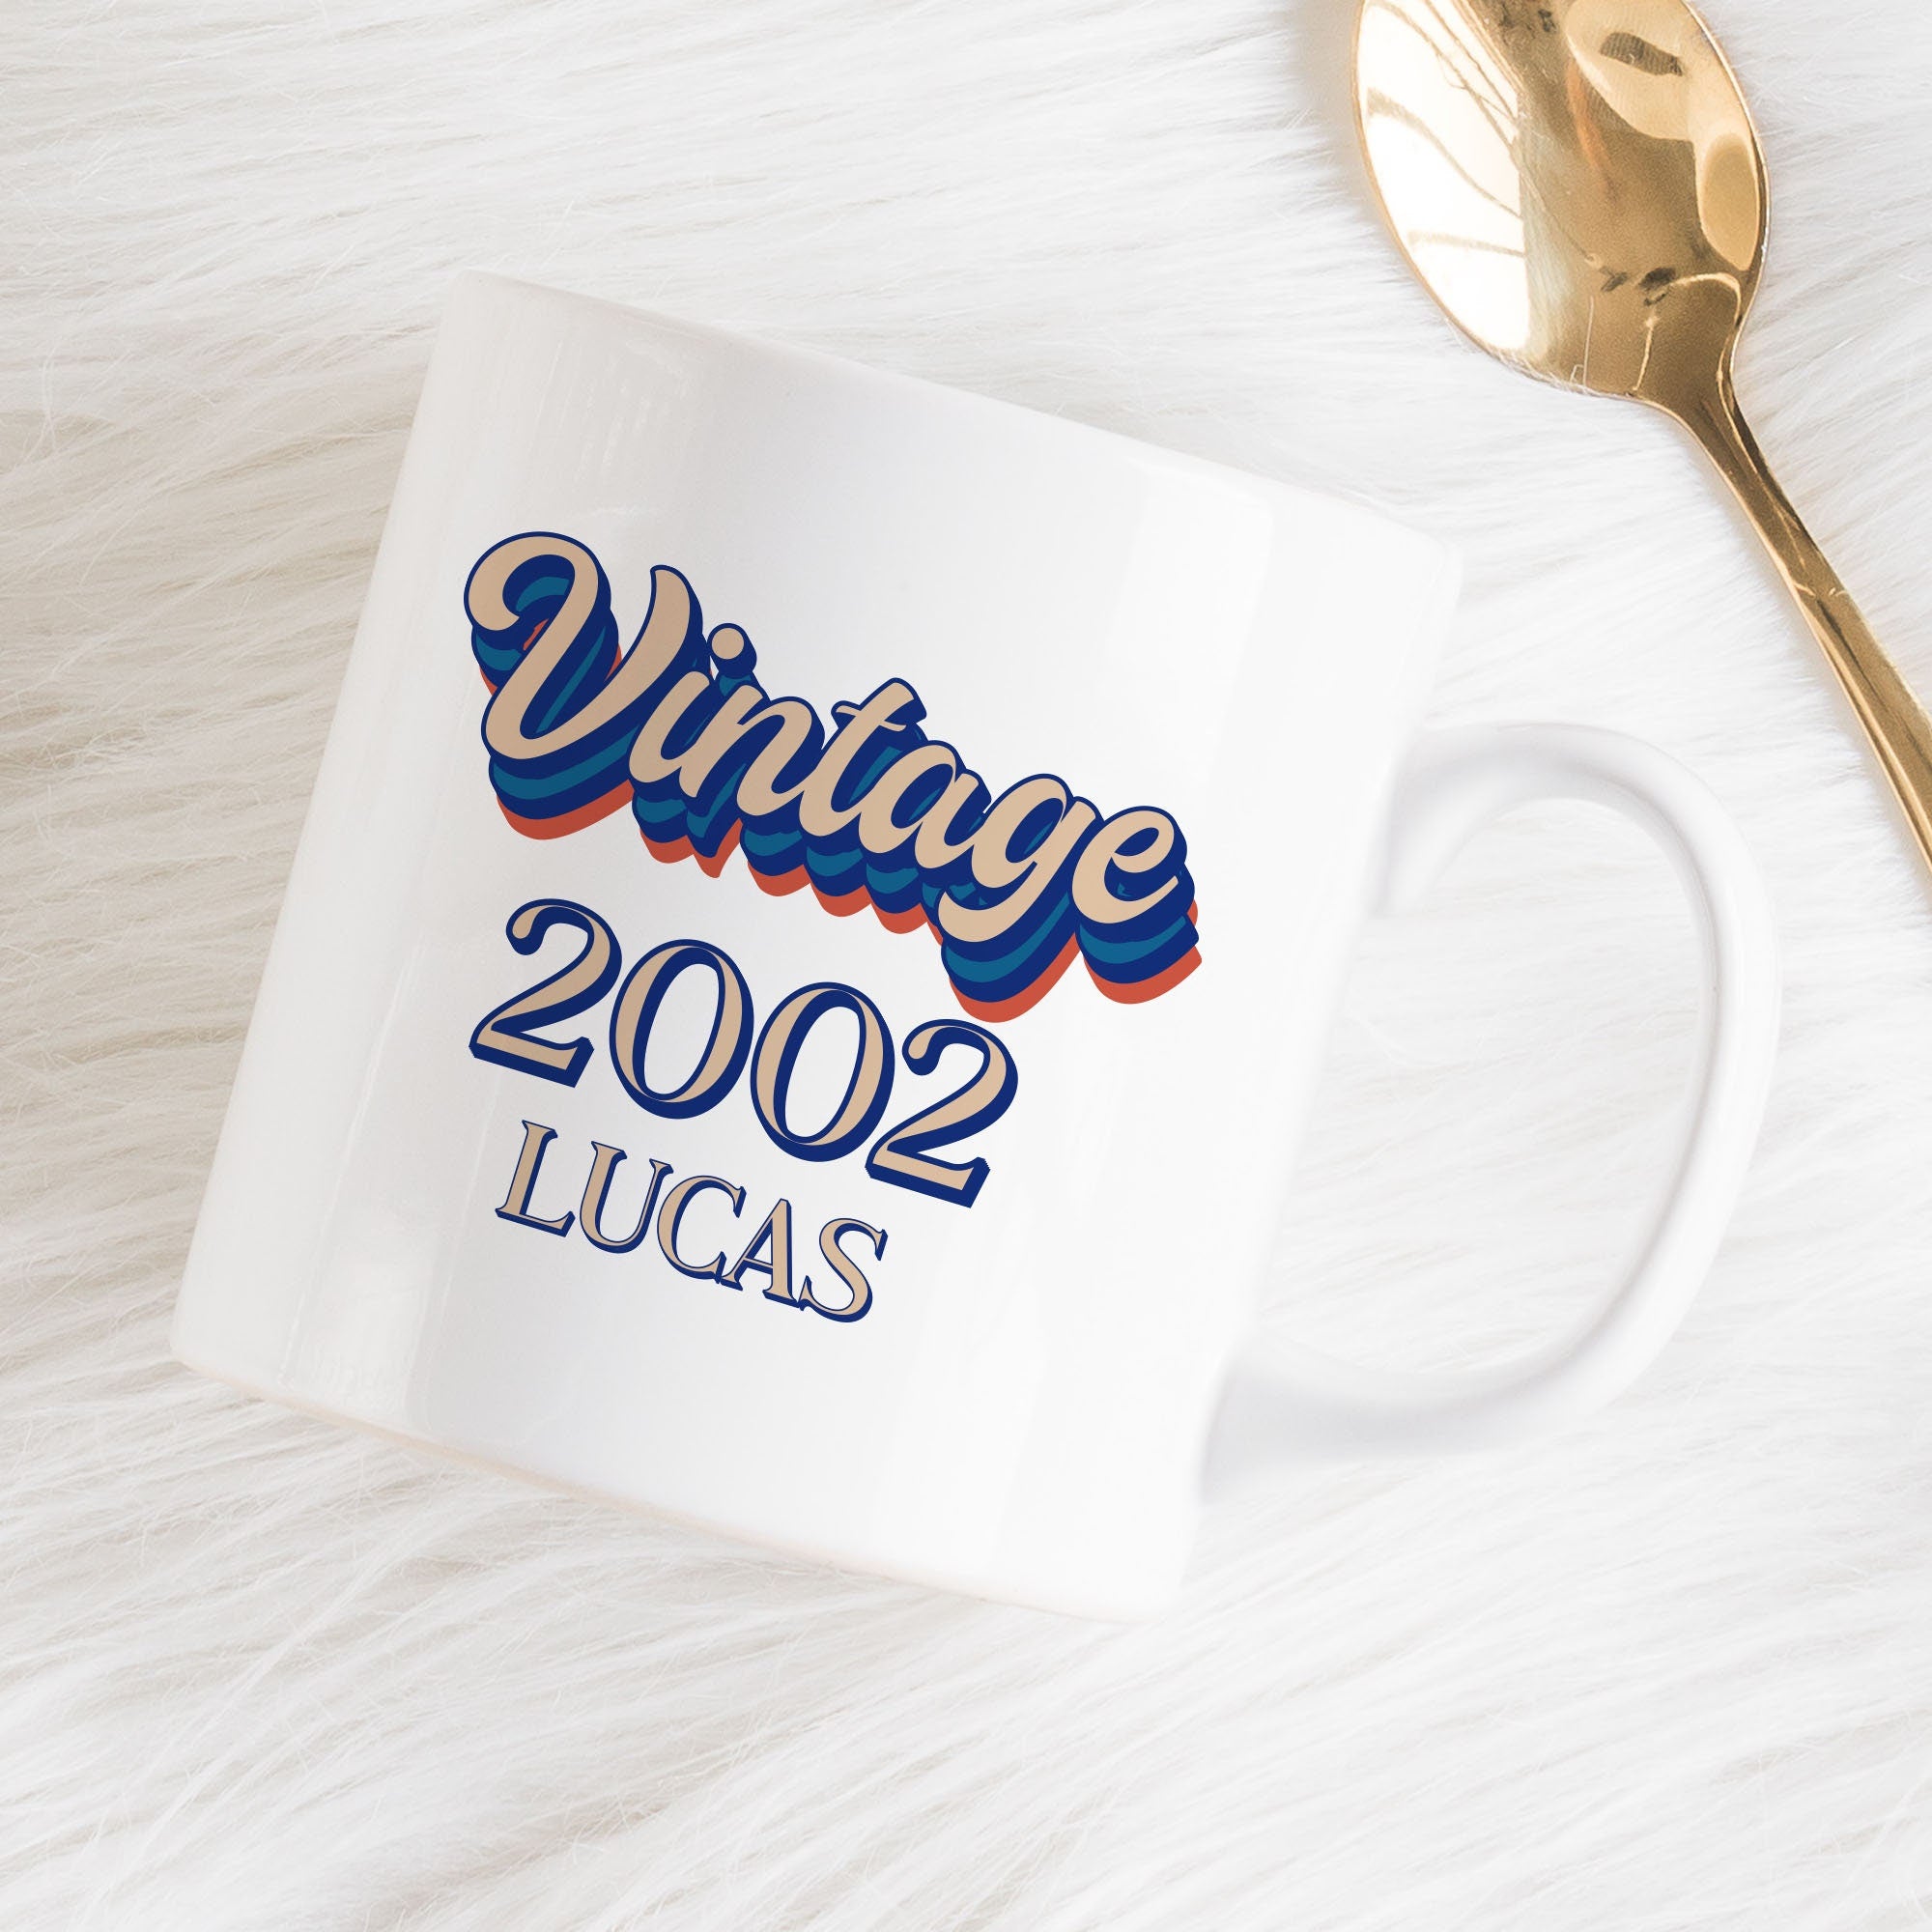 Birthday Year Mug, Vintage 2002 1992 1982 1972 Etc, Birthday Gift For Her Him, Gift For Him Or Her